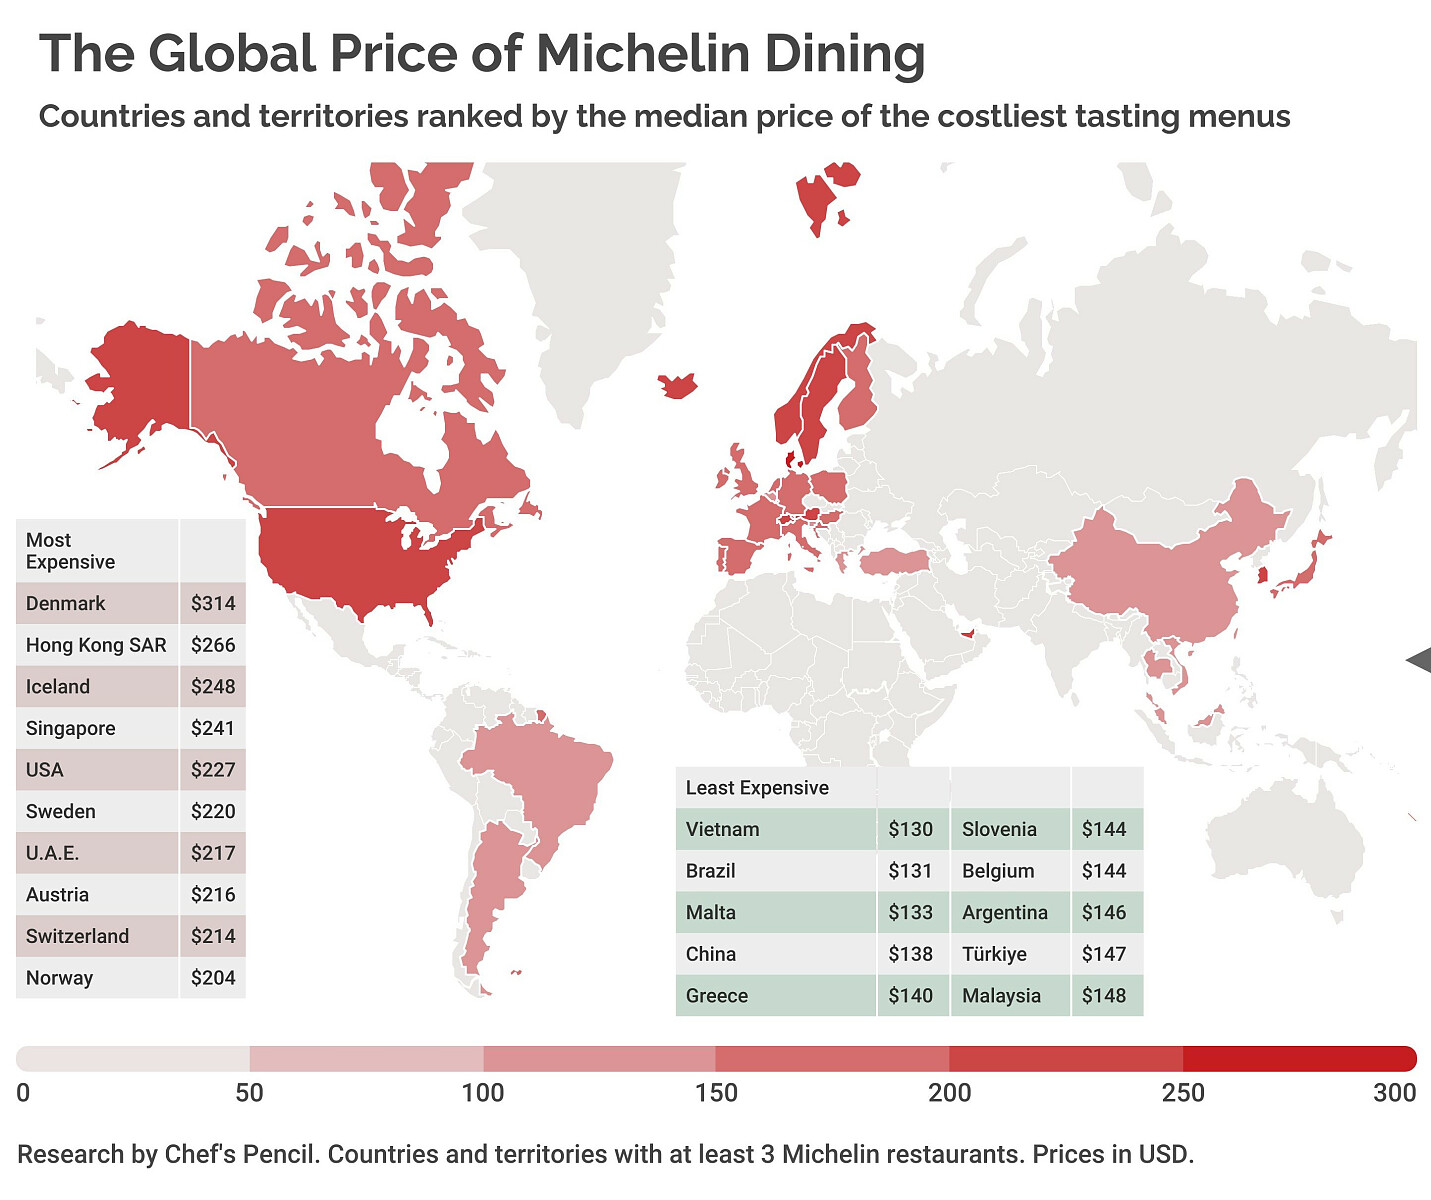 michelin-prices-global-map-usd-final-1.jpg [551.42 KB]